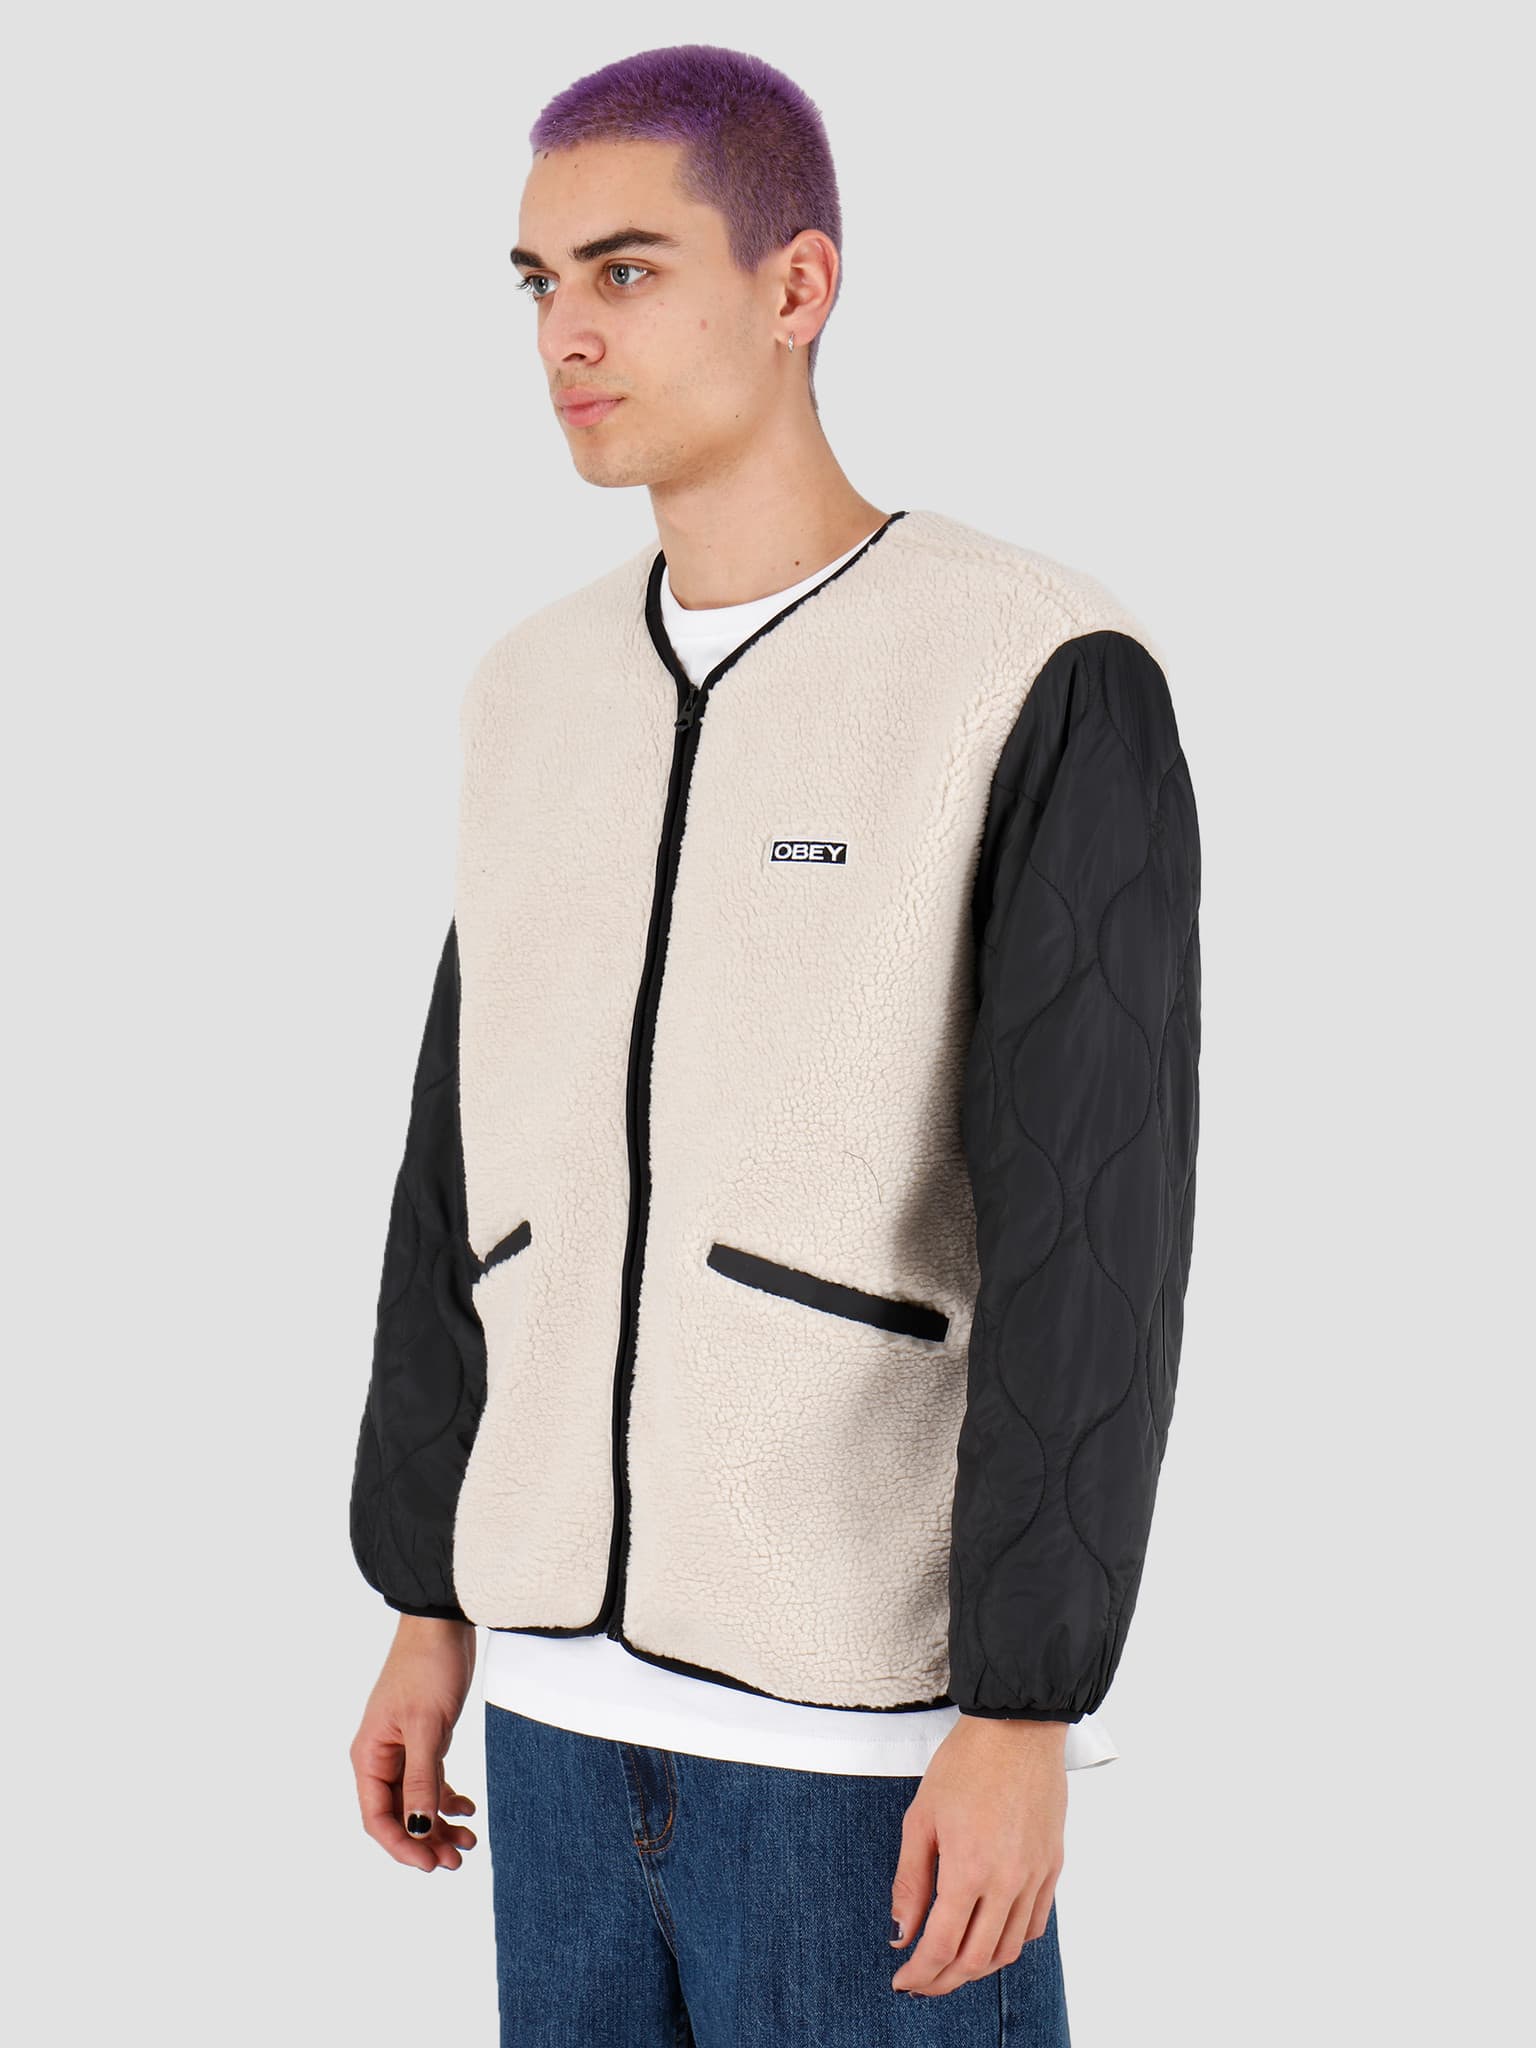 Oyster Jacket Natural Multi 121800407Nml